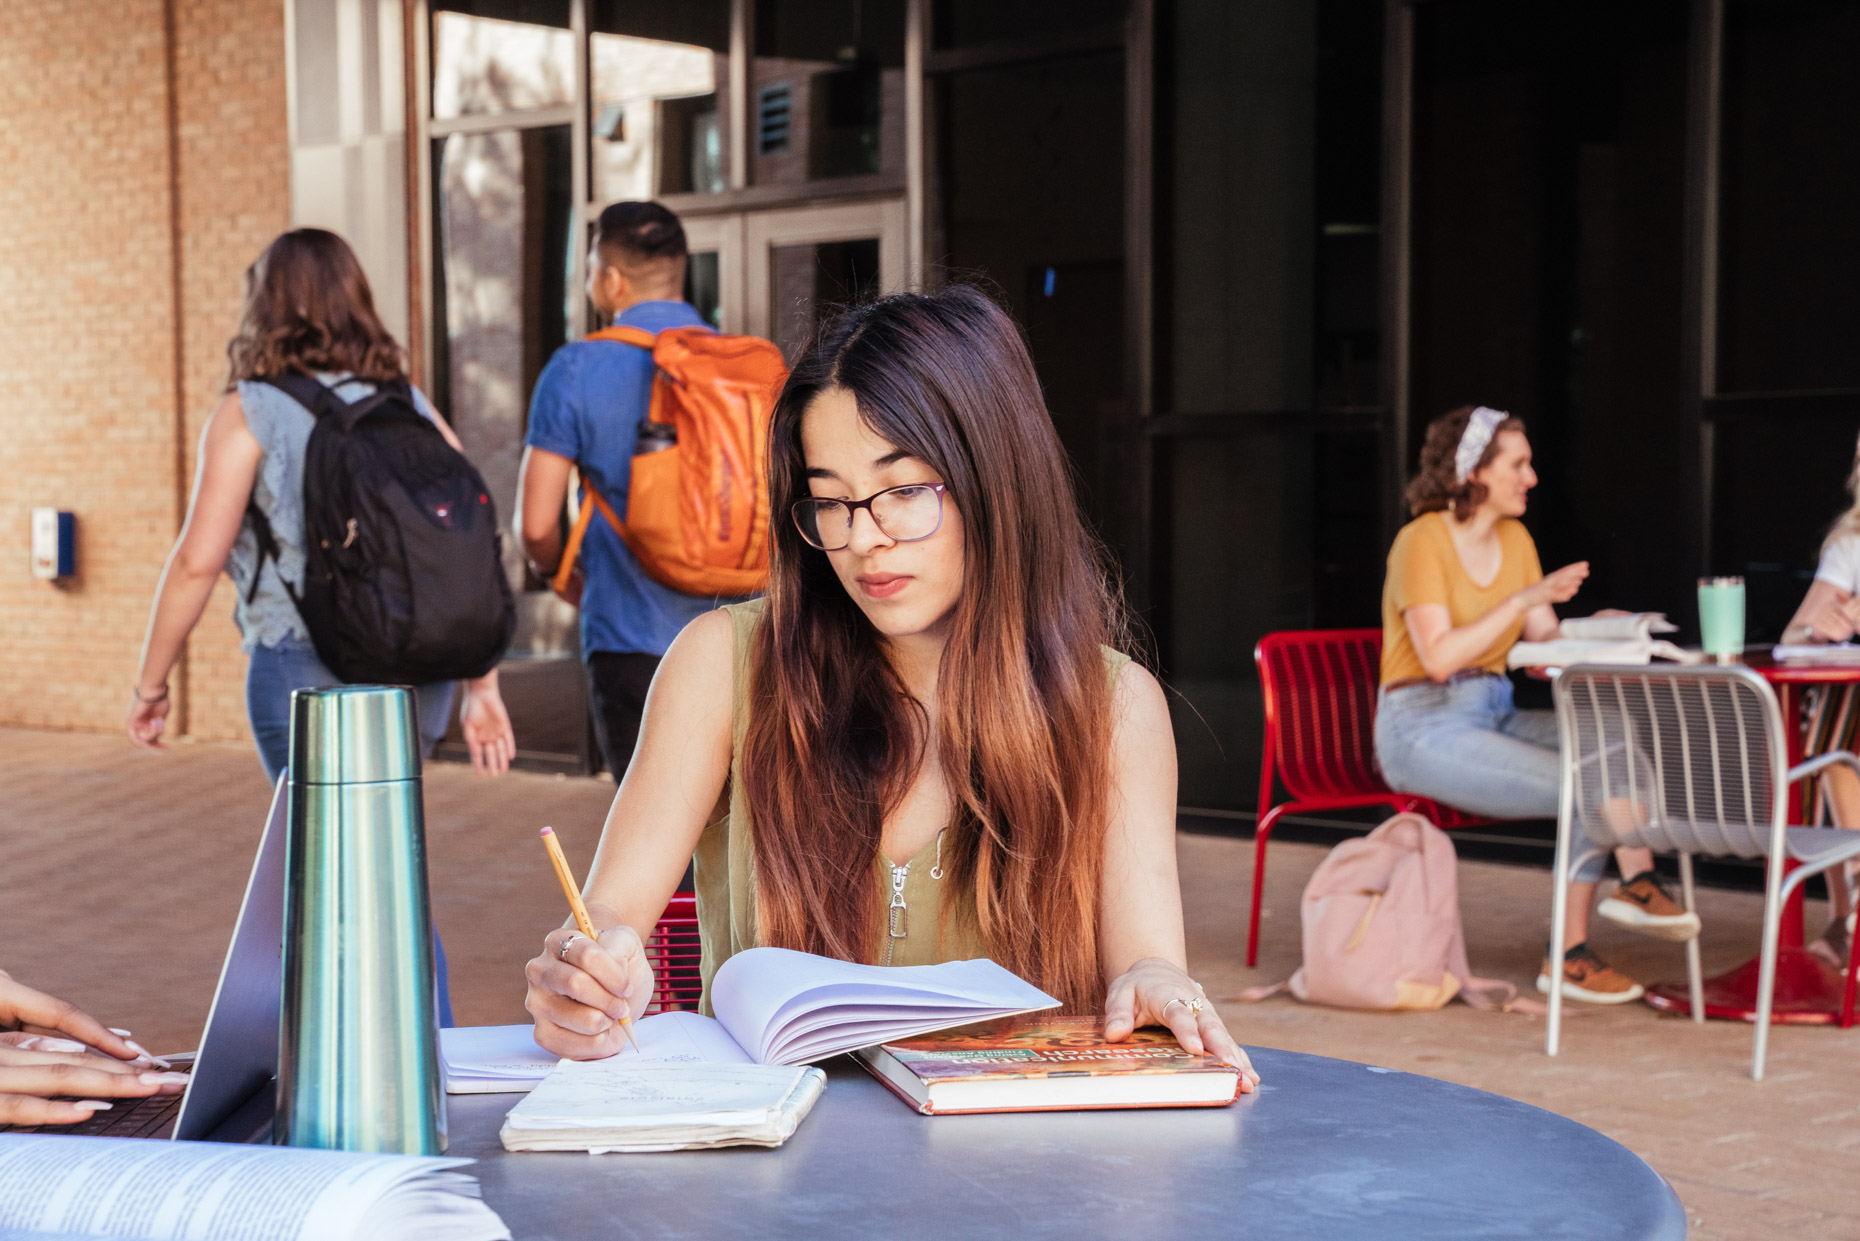 Female college student taking notes sitting at table in campus courtyard